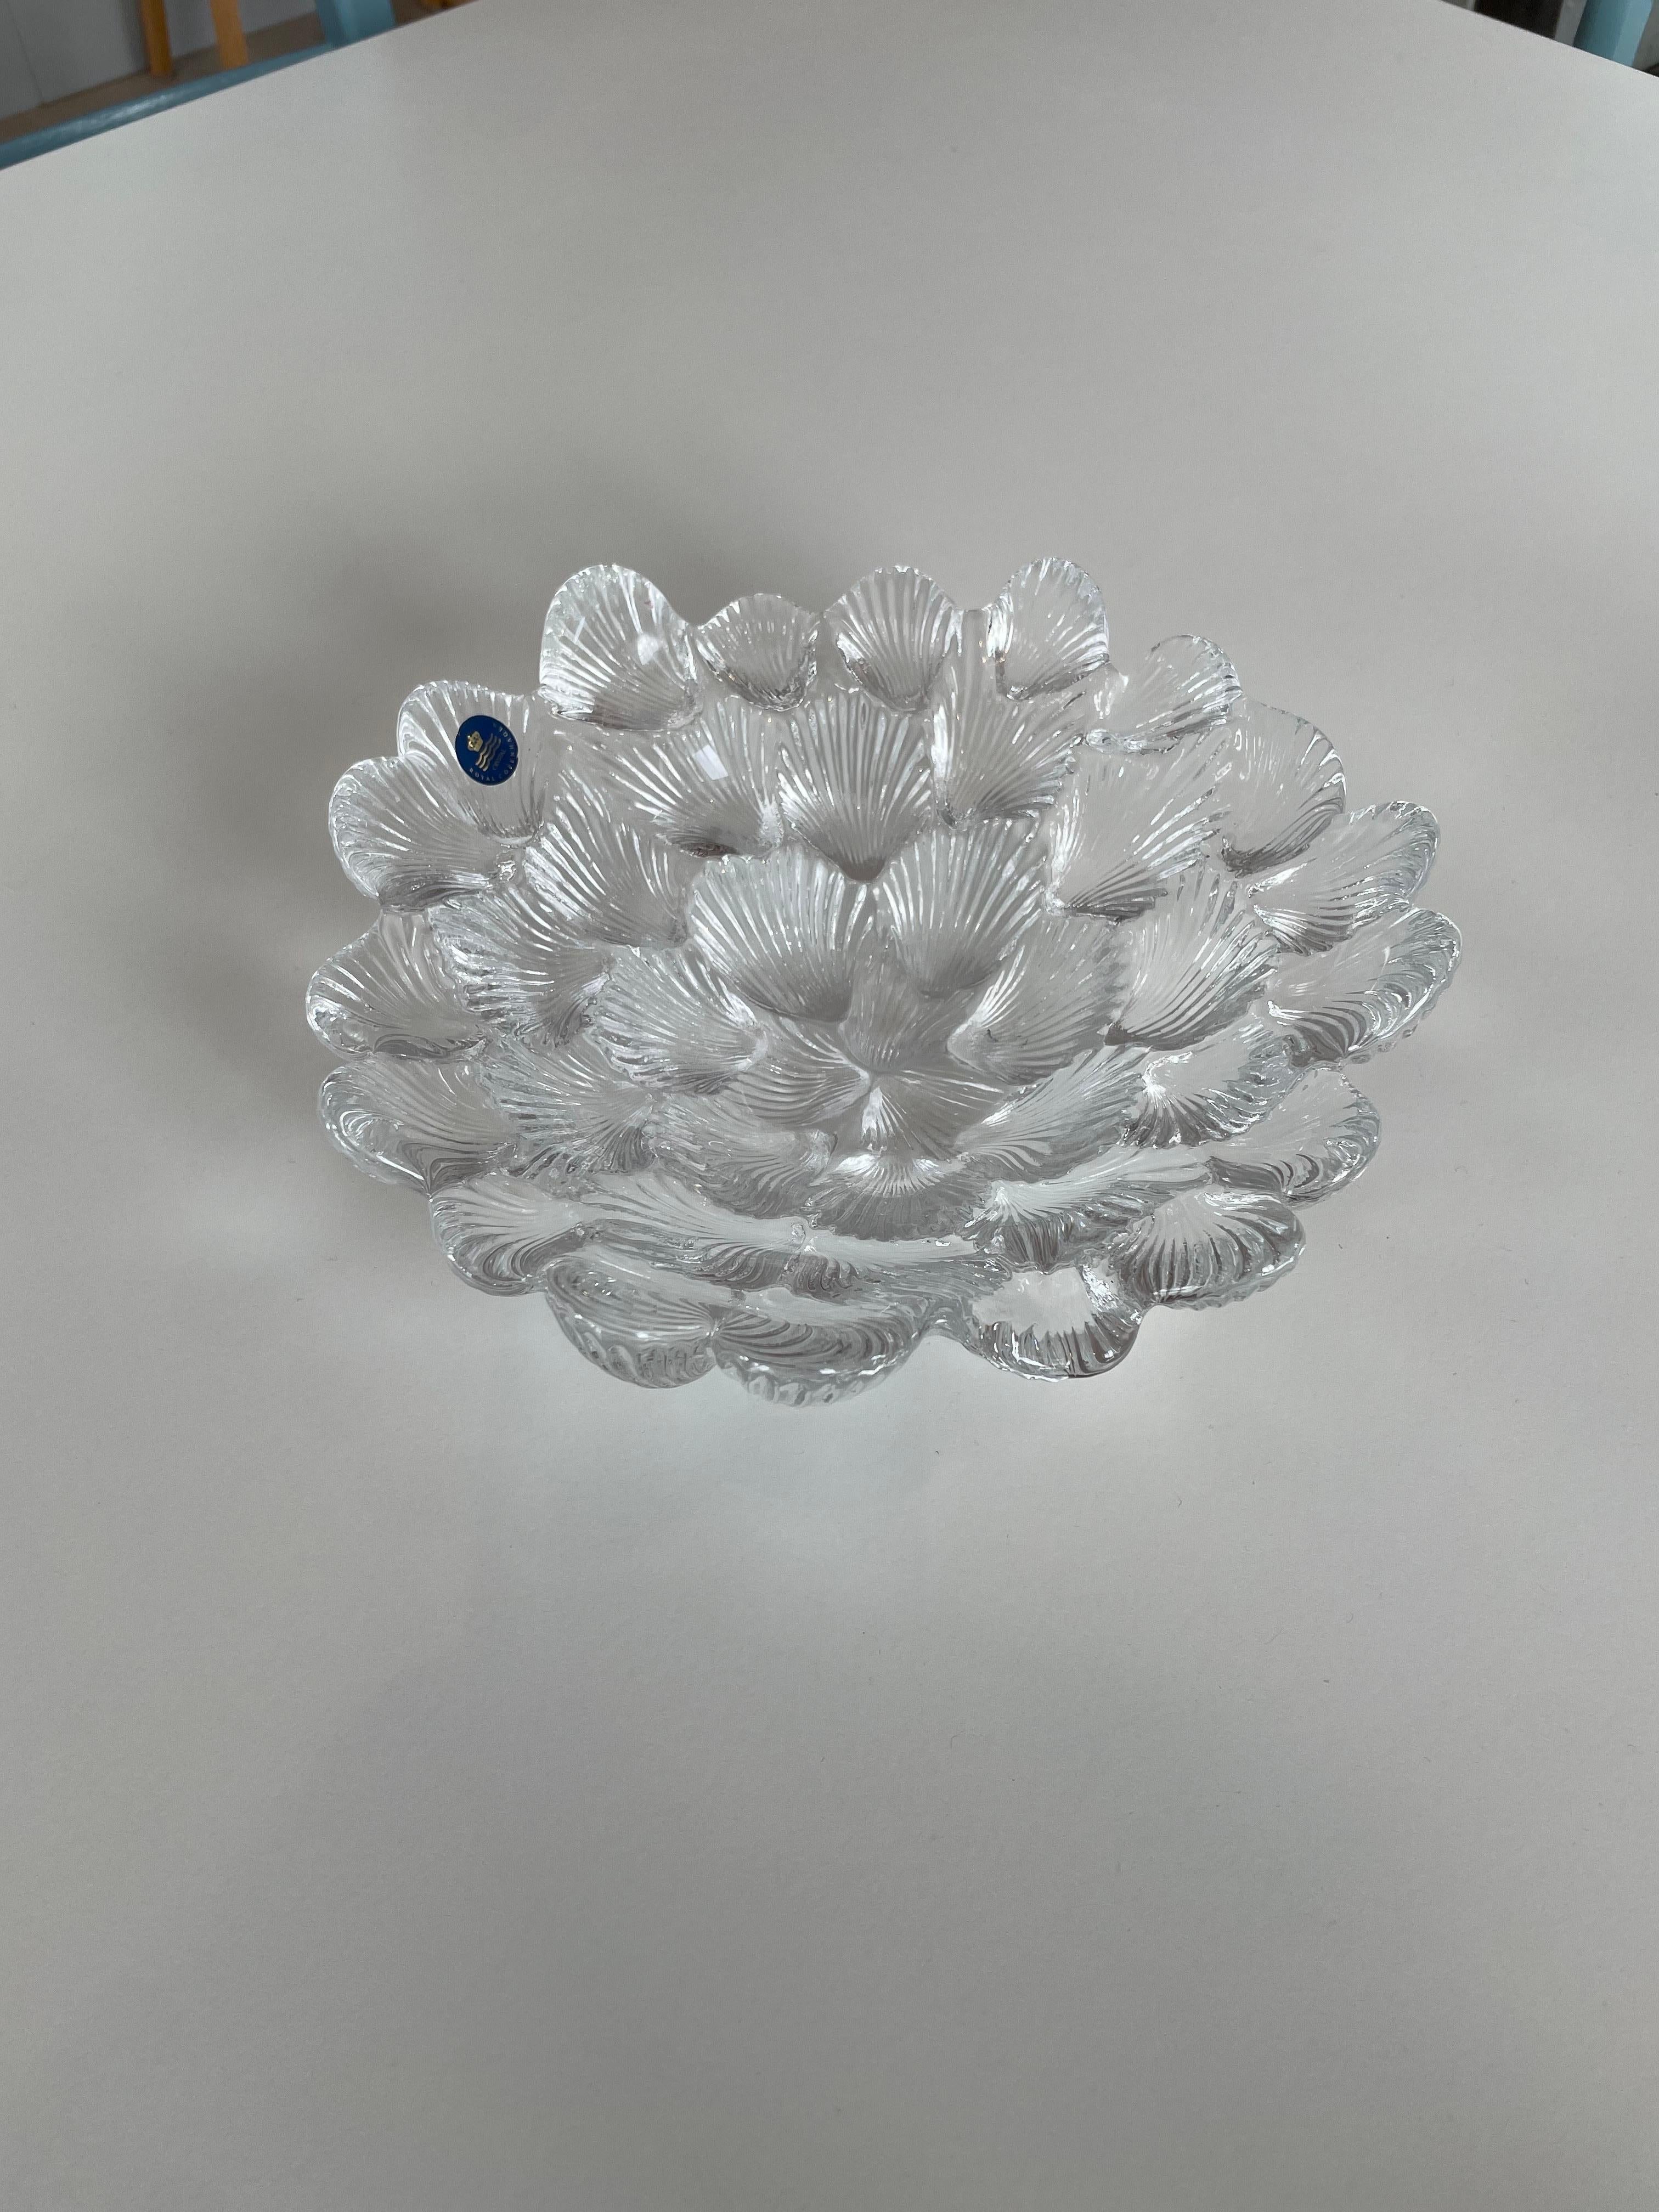 Royal Copenhagen crystal bowl from the 1980s.
Designed by renowned artist Per Lutken titled Musling (Clam).
Stunning crystal bowl in the form of a mass of clam shells. Textured on the underside and clear smooth crystal on the inside.

The bowl is in